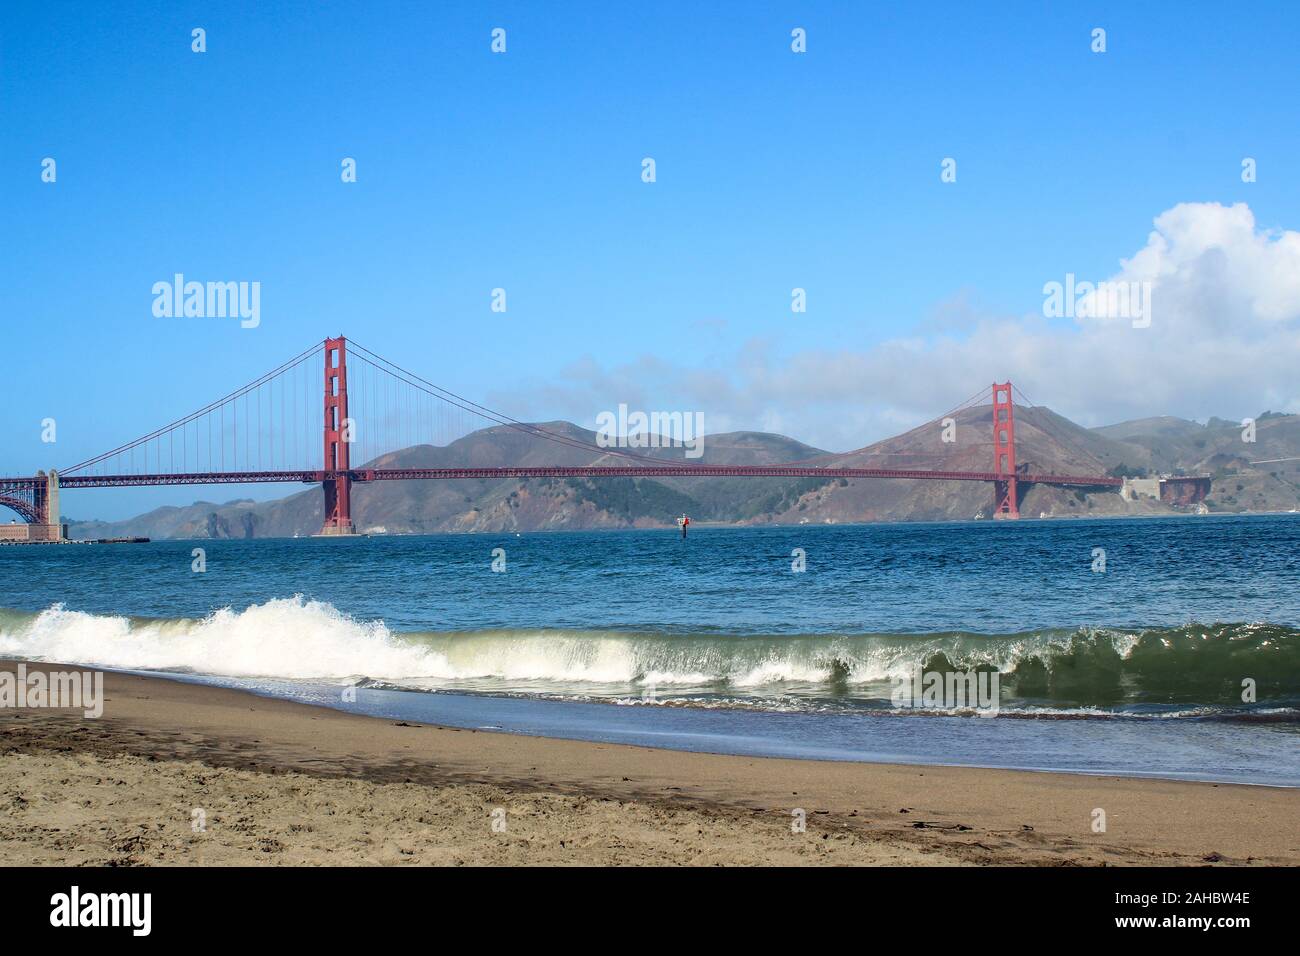 International orange Golden Gate Bridge with waves breaking on to Crissy Field recreational area beach in front. San Francisco, United States. Stock Photo